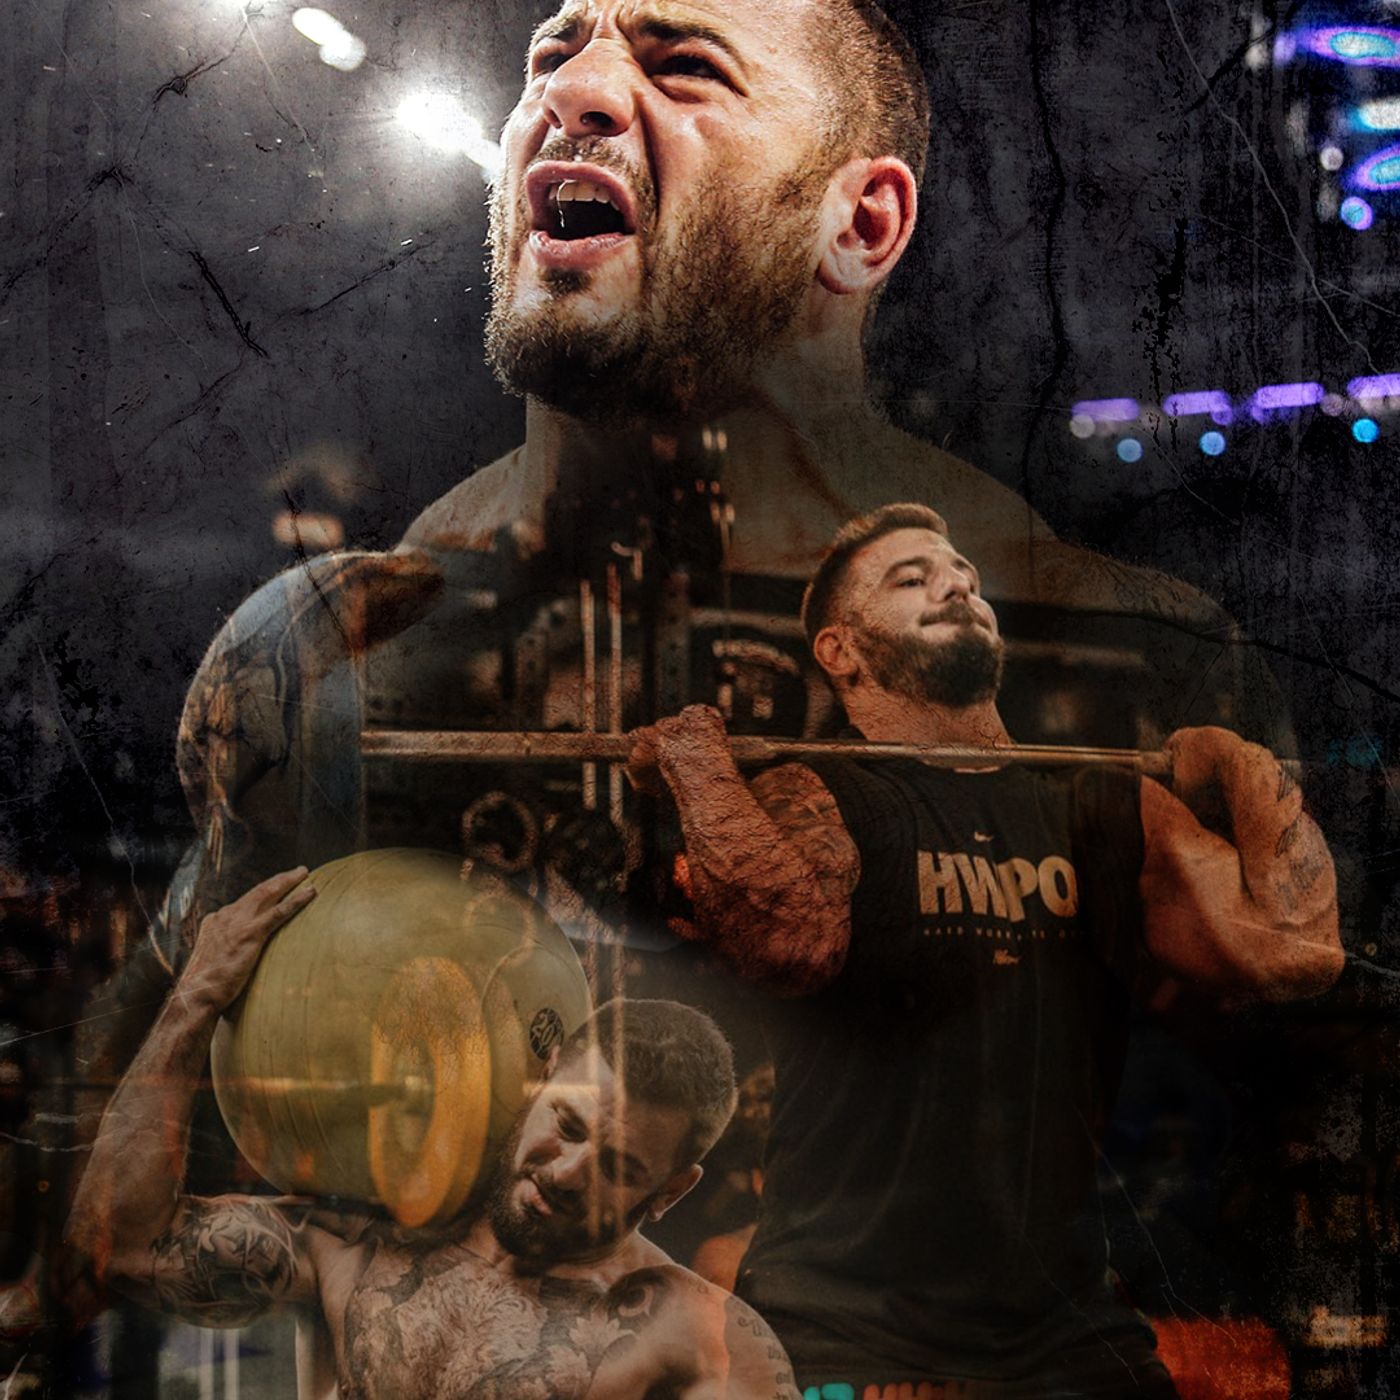 Mat Fraser: 5-Time CrossFit Games Champion & Author of HWPO: Hard Work Pays Off